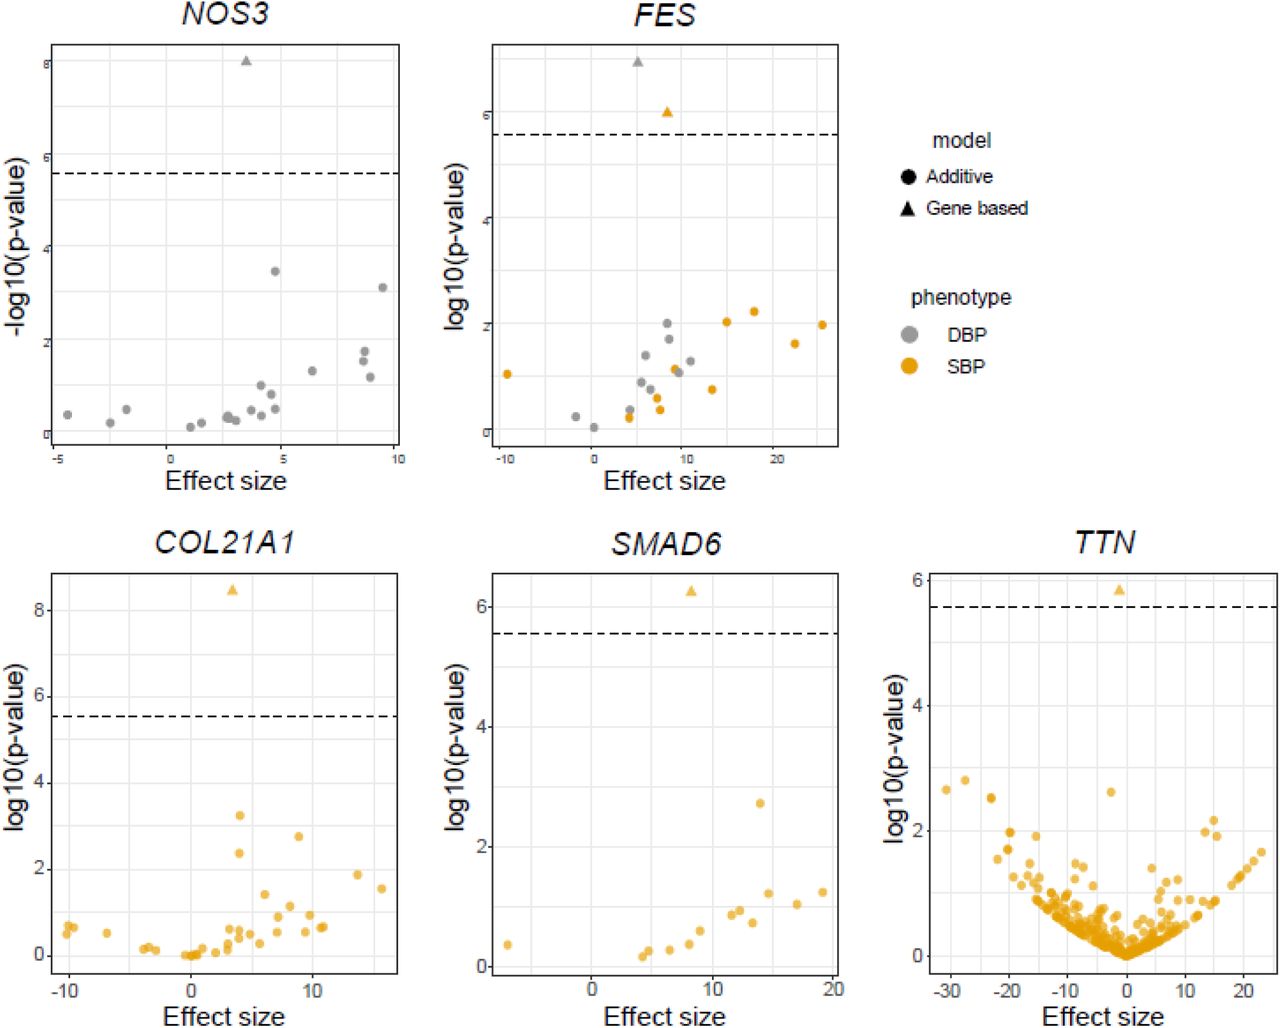 Allele frequency and effect sizes for genetic variants associated